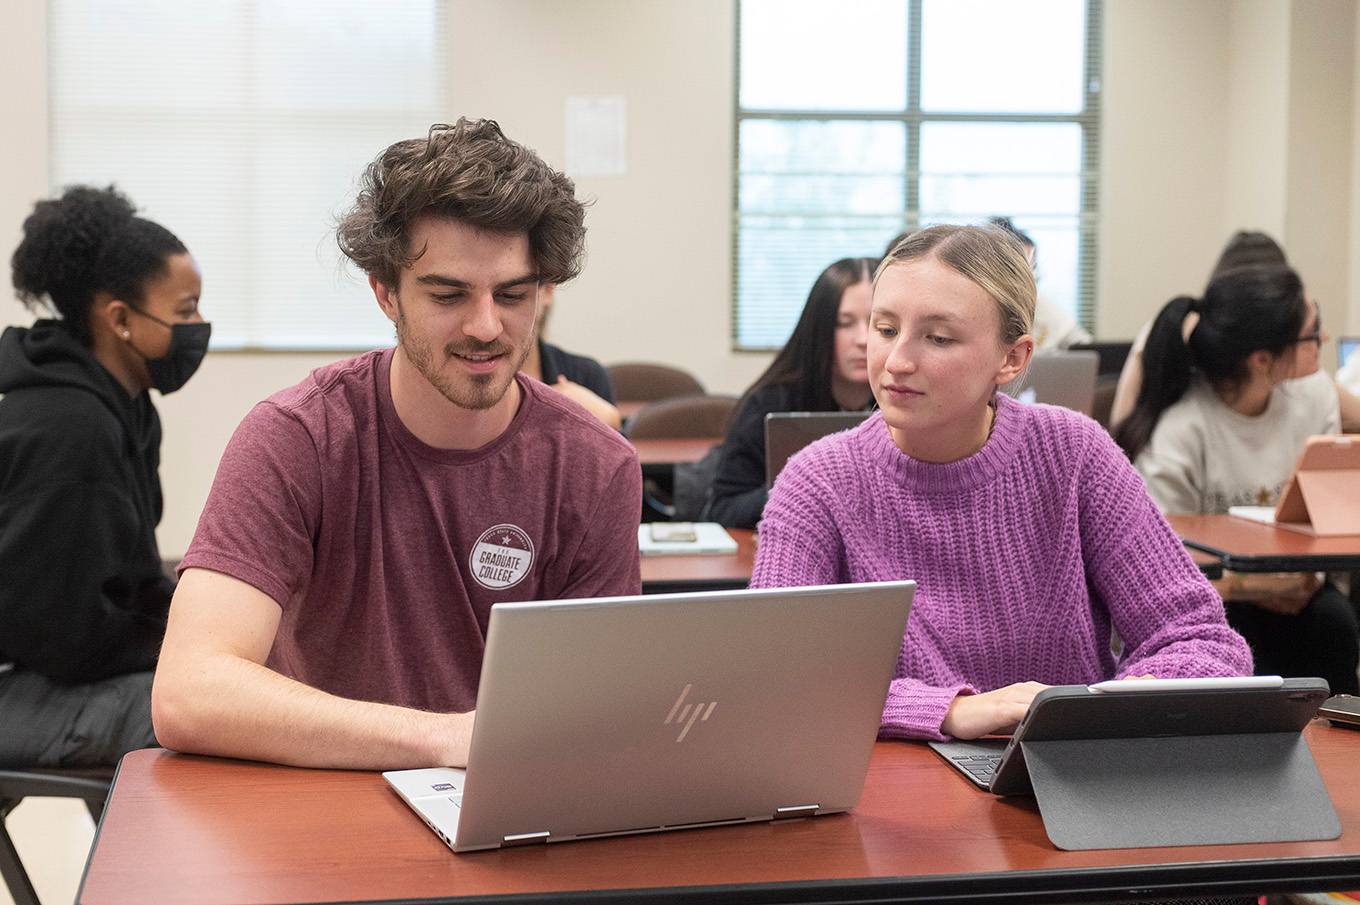 man and woman looking at computers in classroom